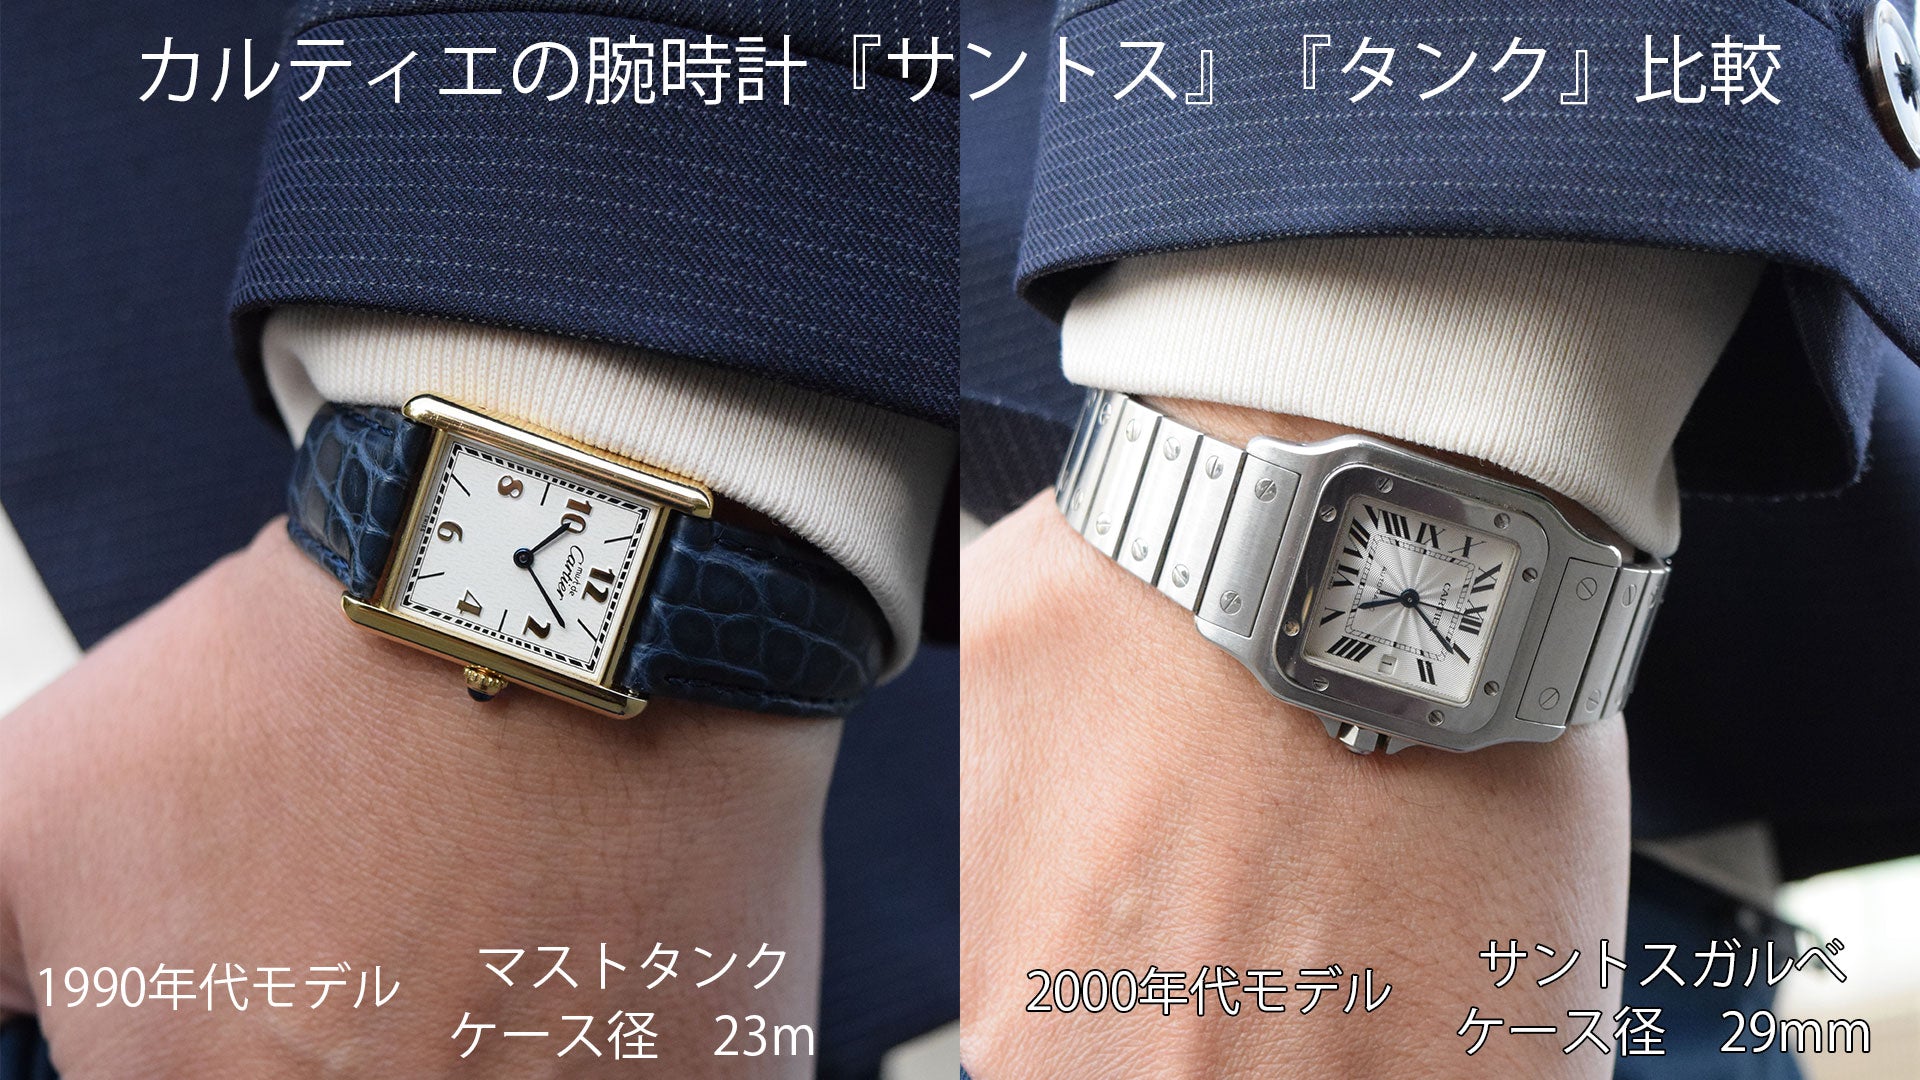 Comparison of Cartier watches "Santos" and "Tank"